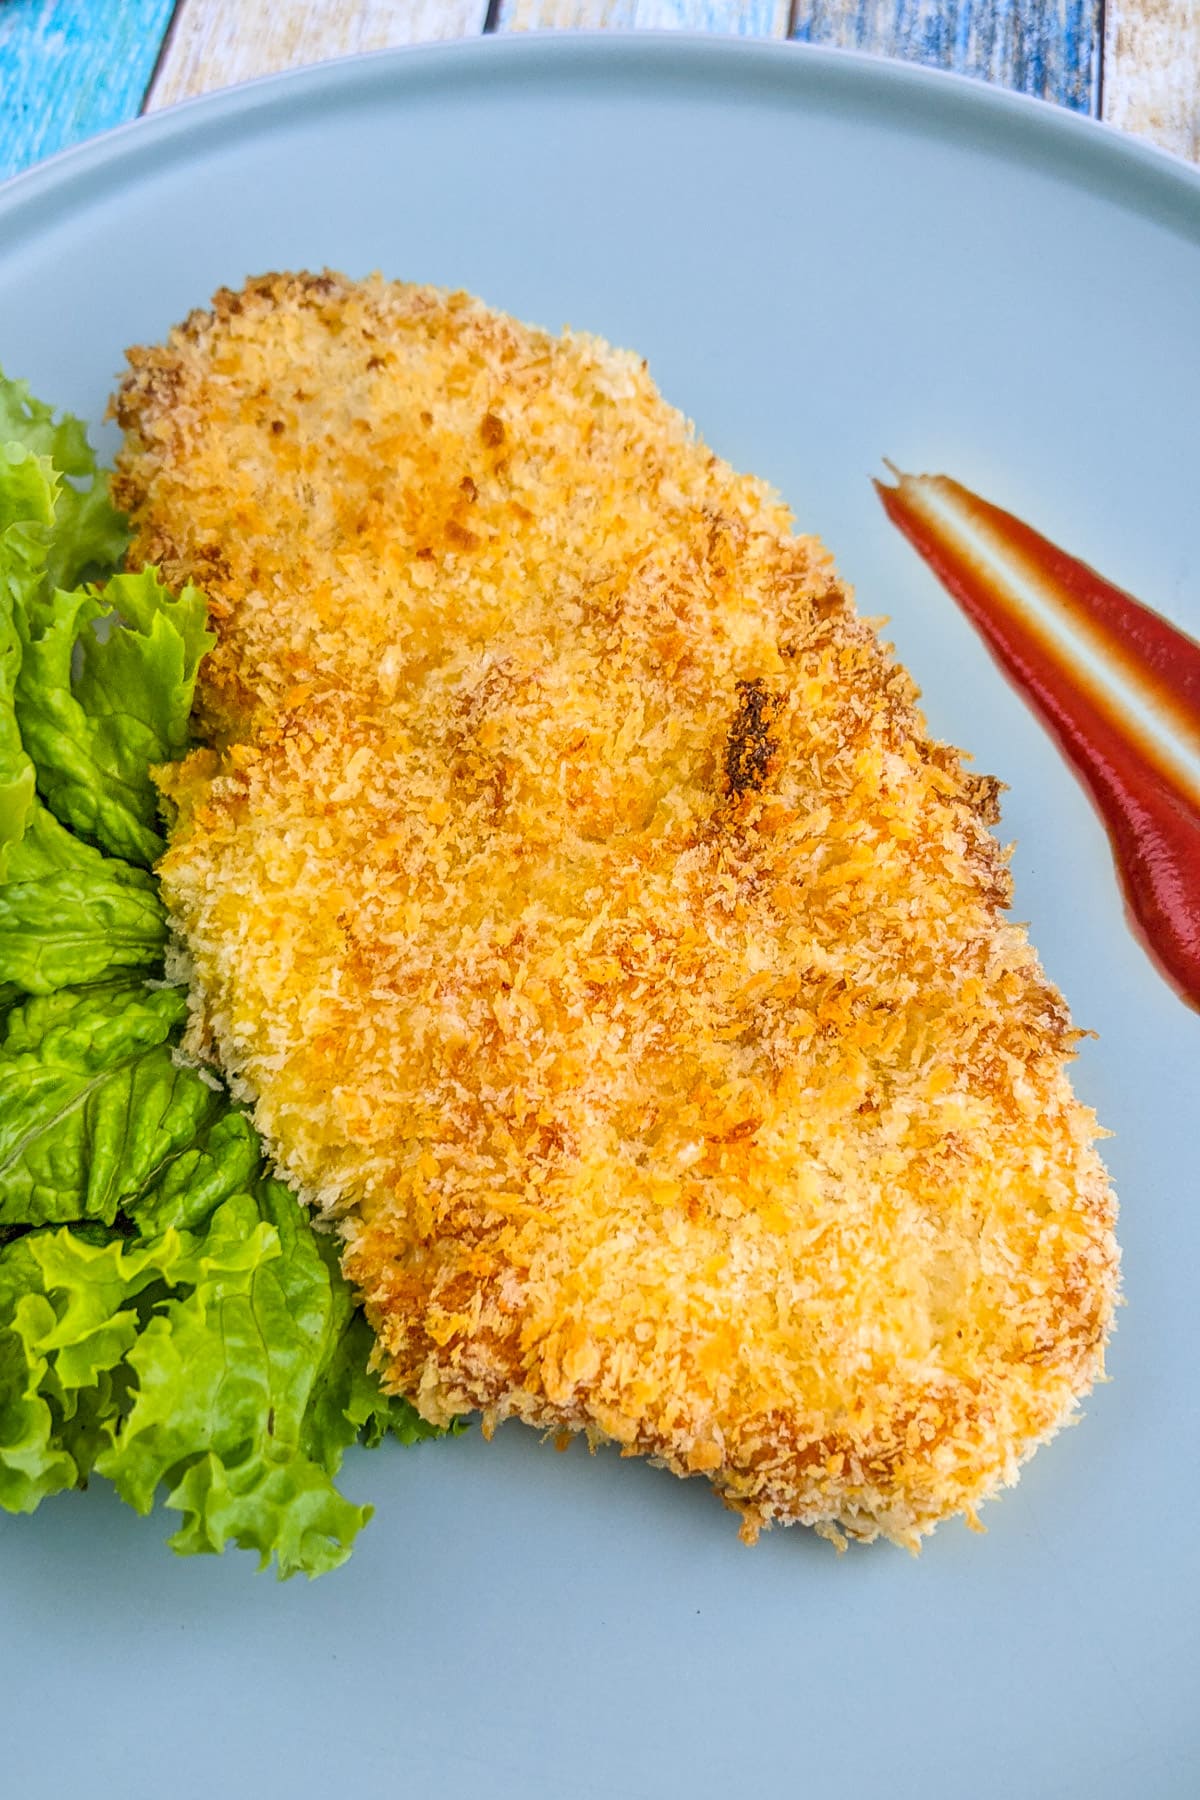 Chicken schnitzel coated in panko with tomato sauce and salad leaves.